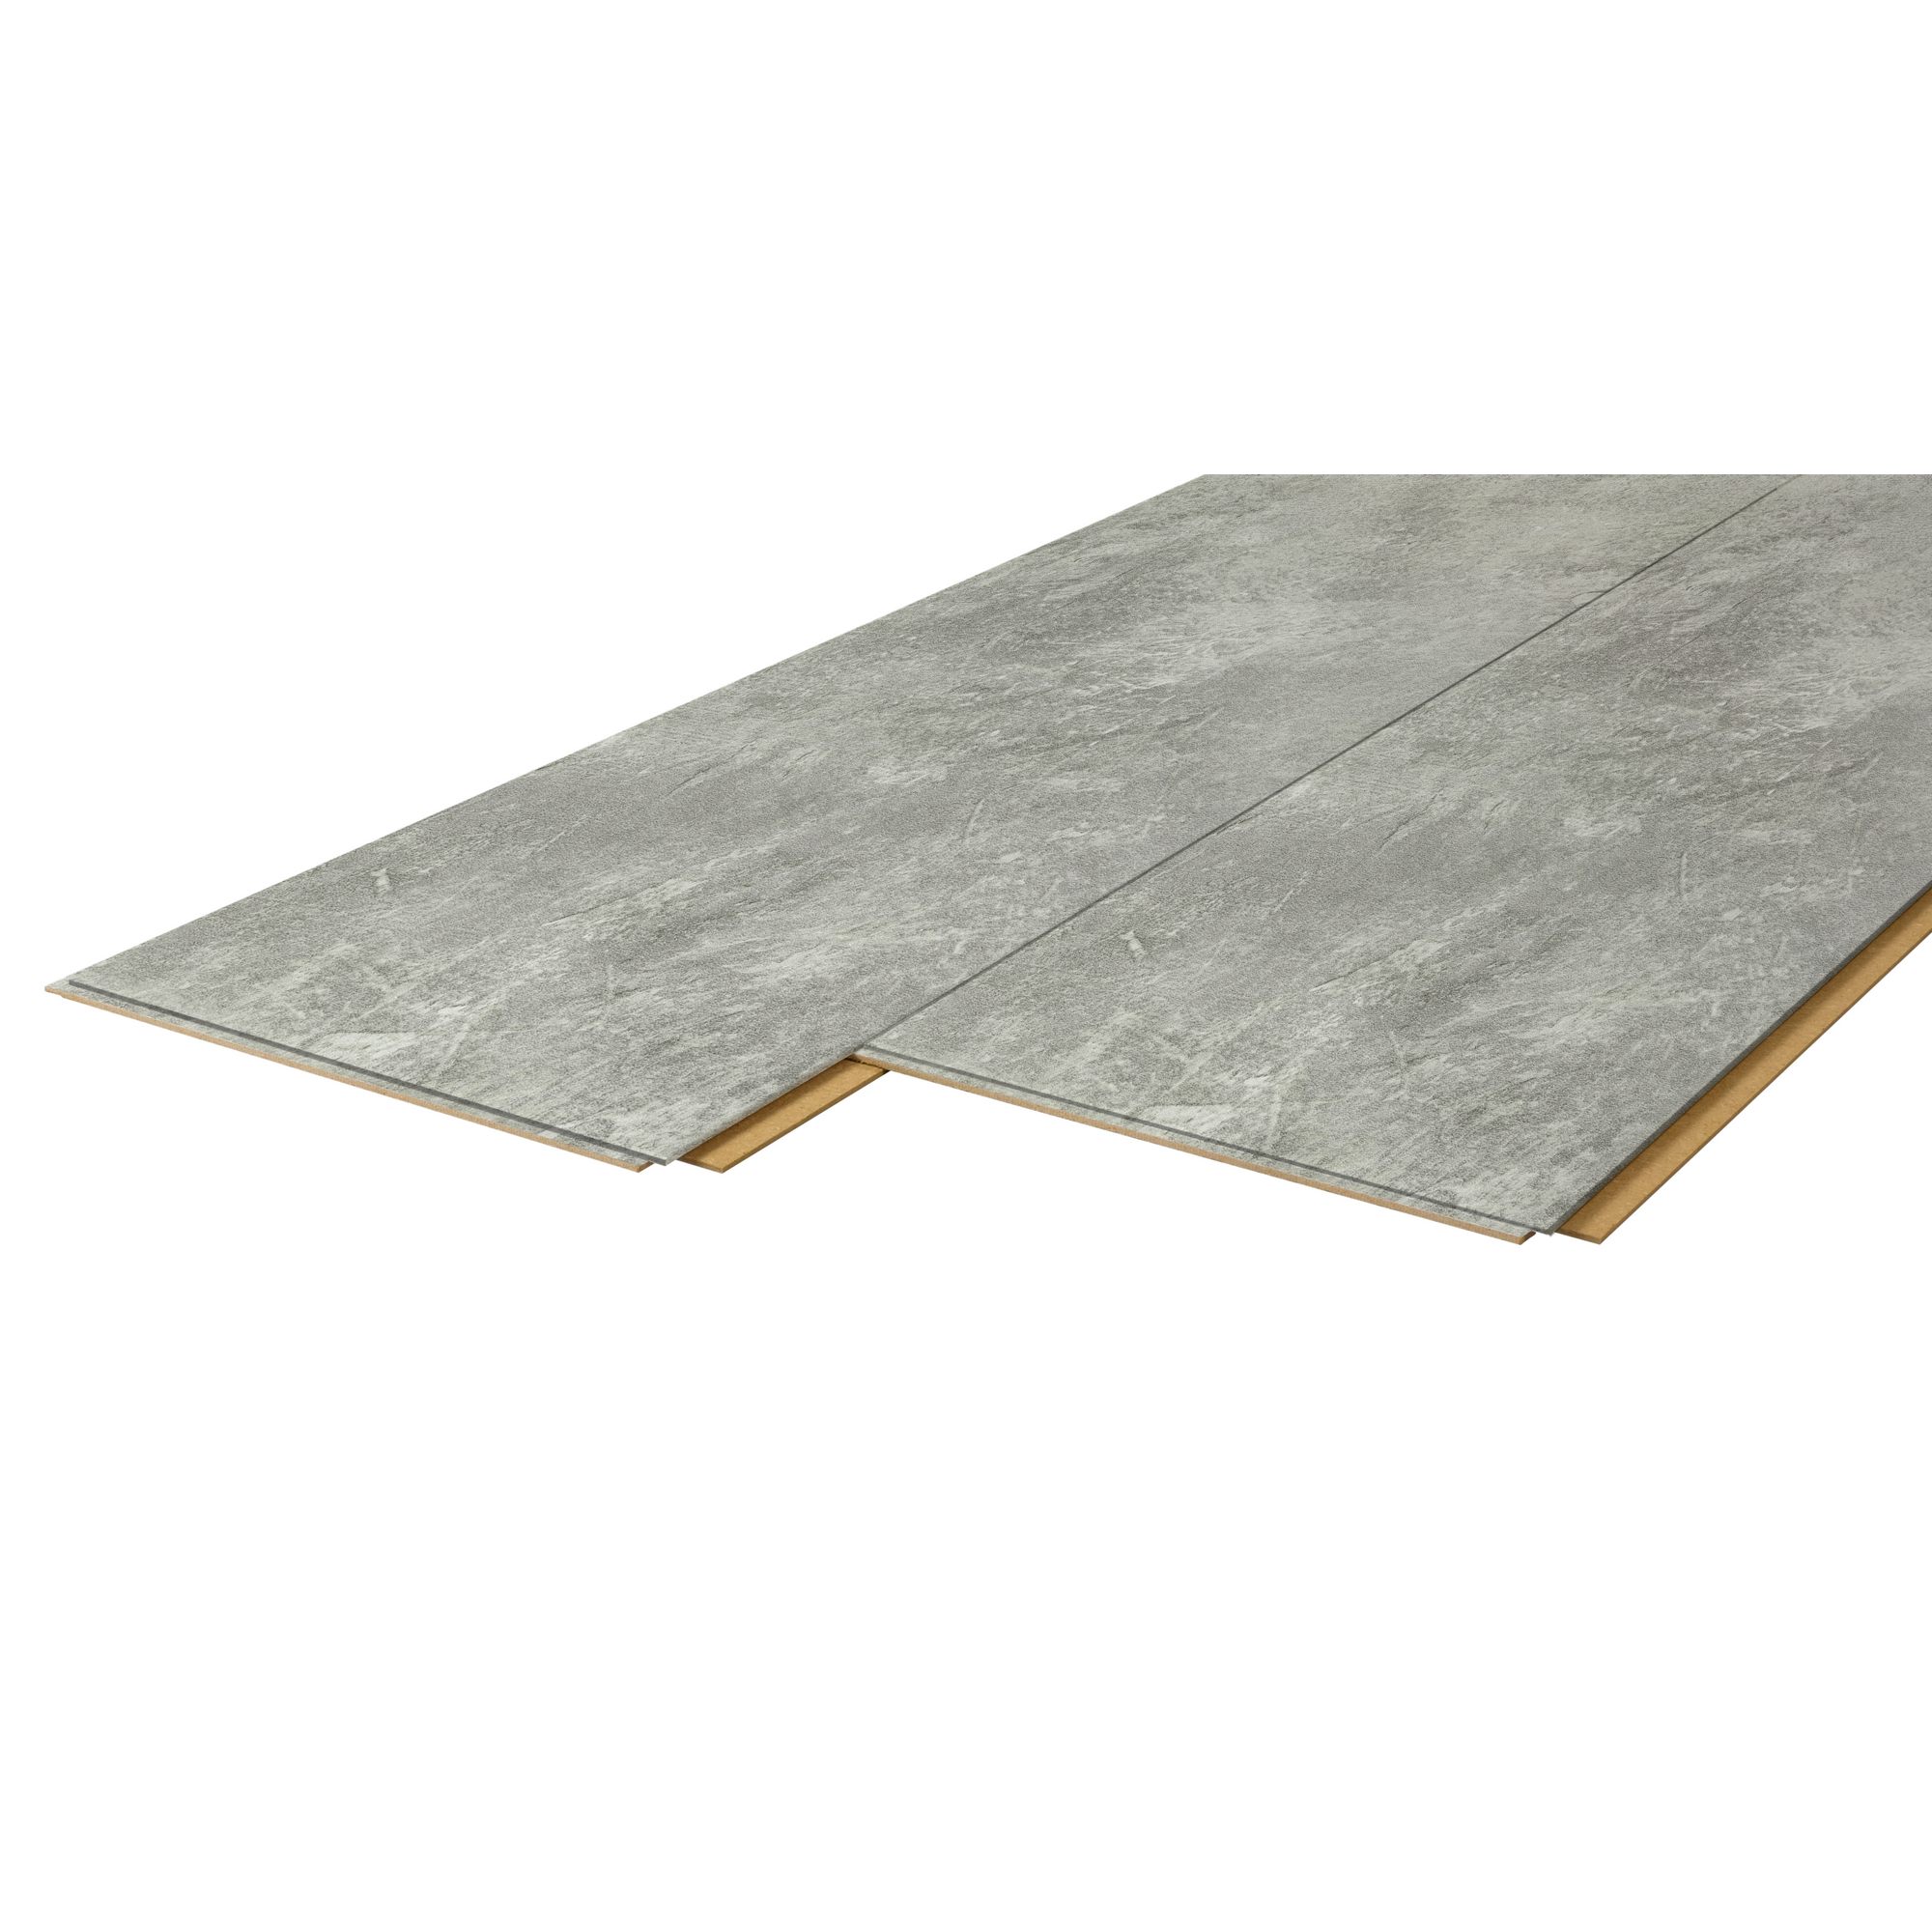 Paneele 'Coverboard' travertin grey 129 x 62 x 1,2 cm + product picture